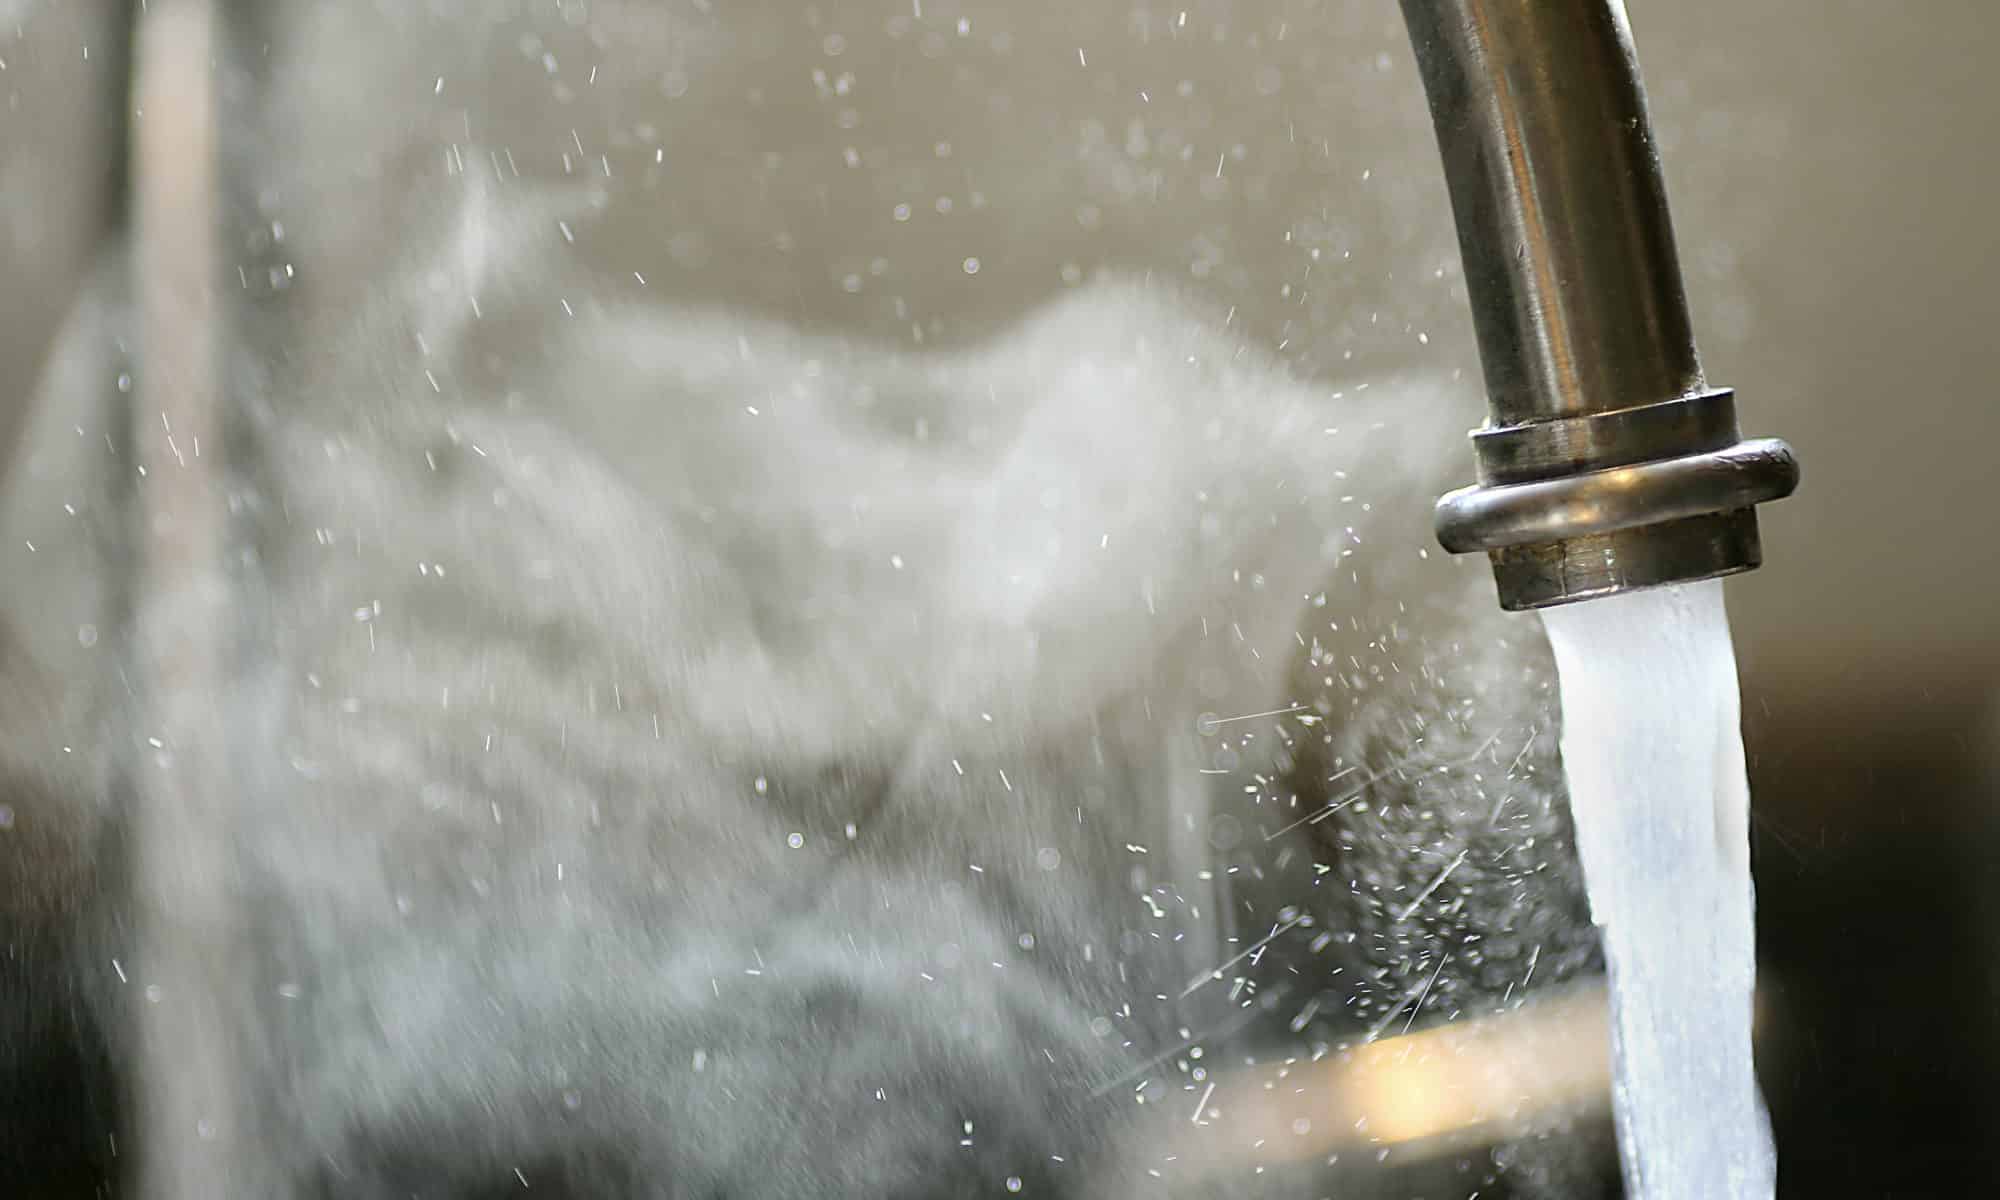 Hot steaming running tap water is pouring out of a stainless steel kitchen faucet.